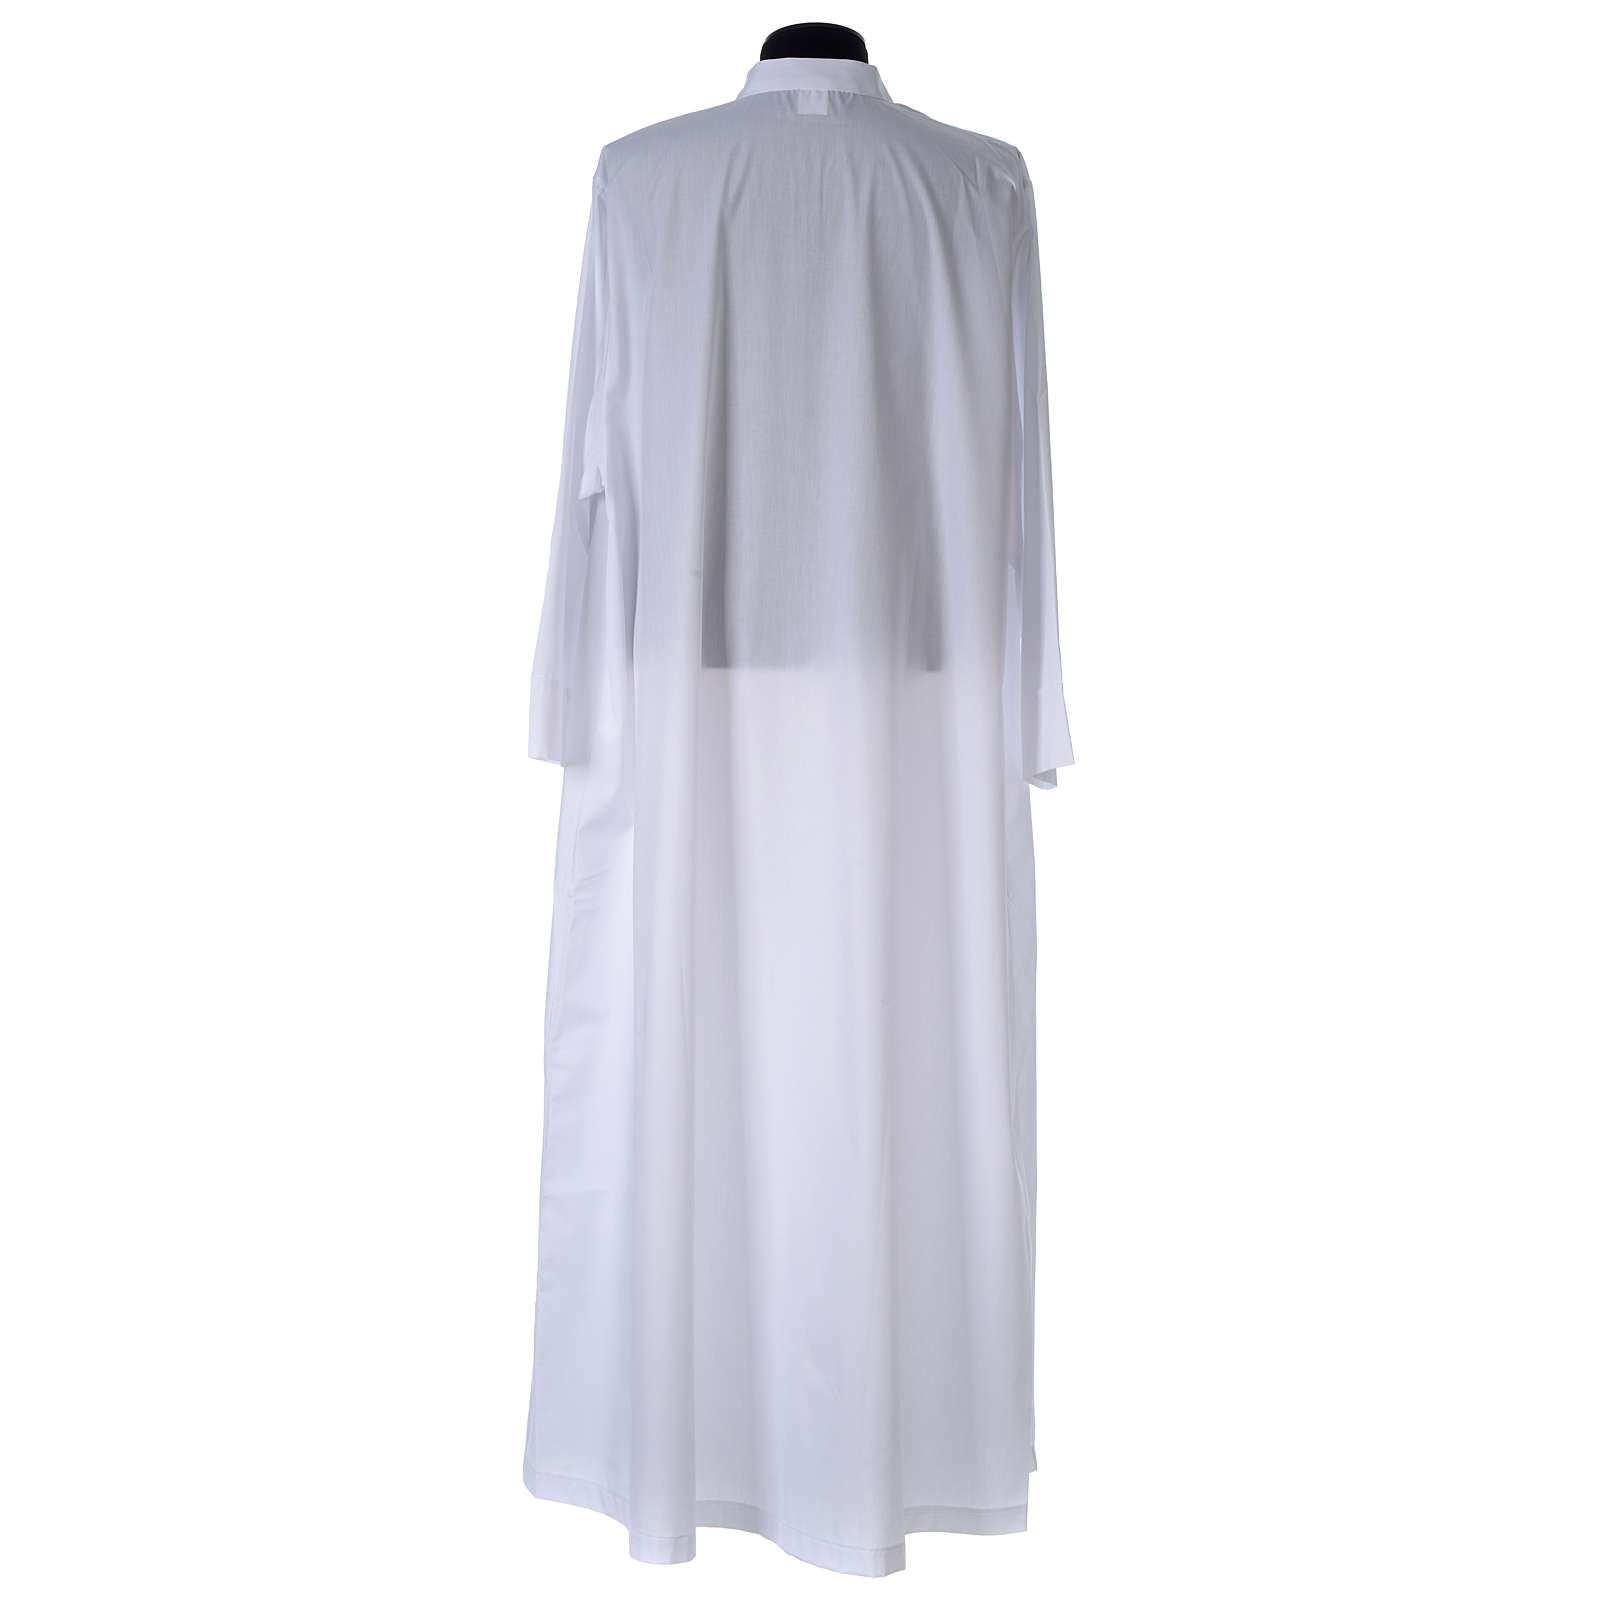 Priest Alb in cotton blend with front zipper | online sales on HOLYART.com